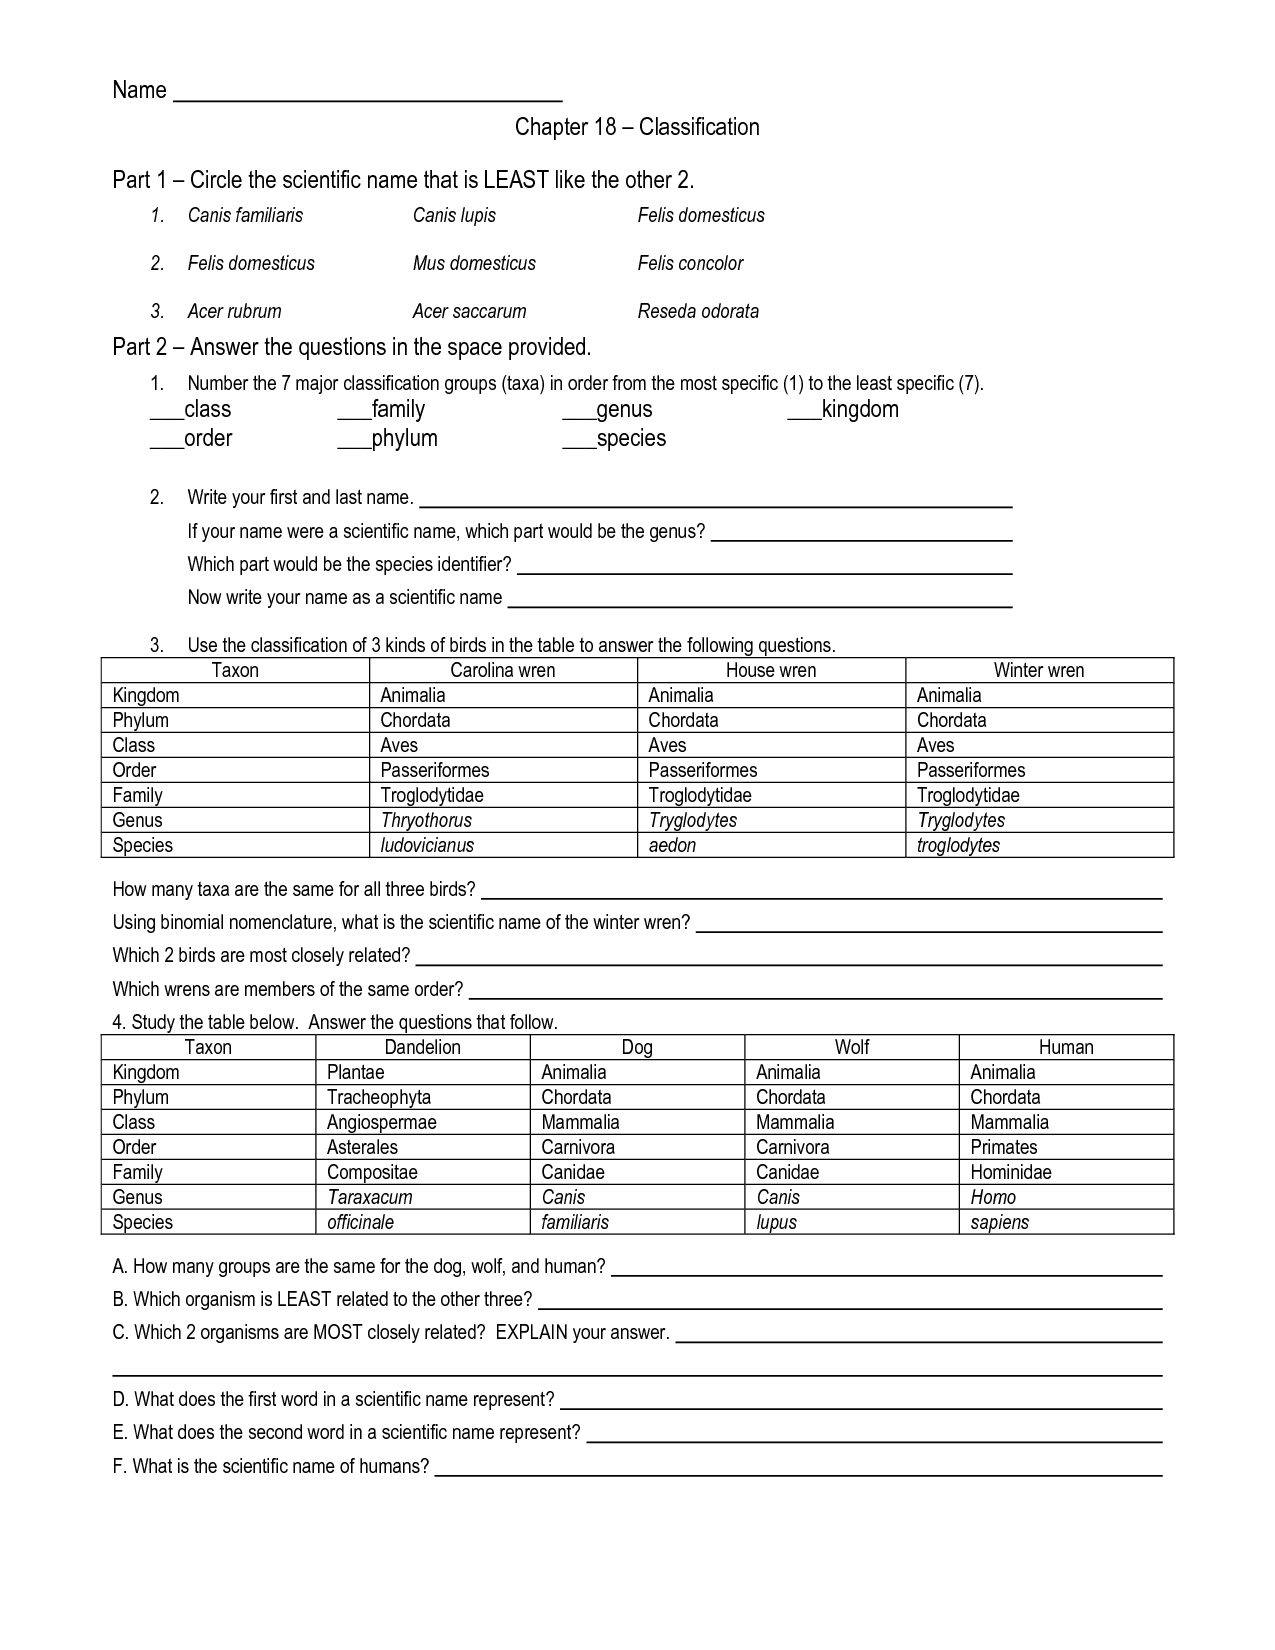 Worksheet for Chapter 18 Classification Answers Image